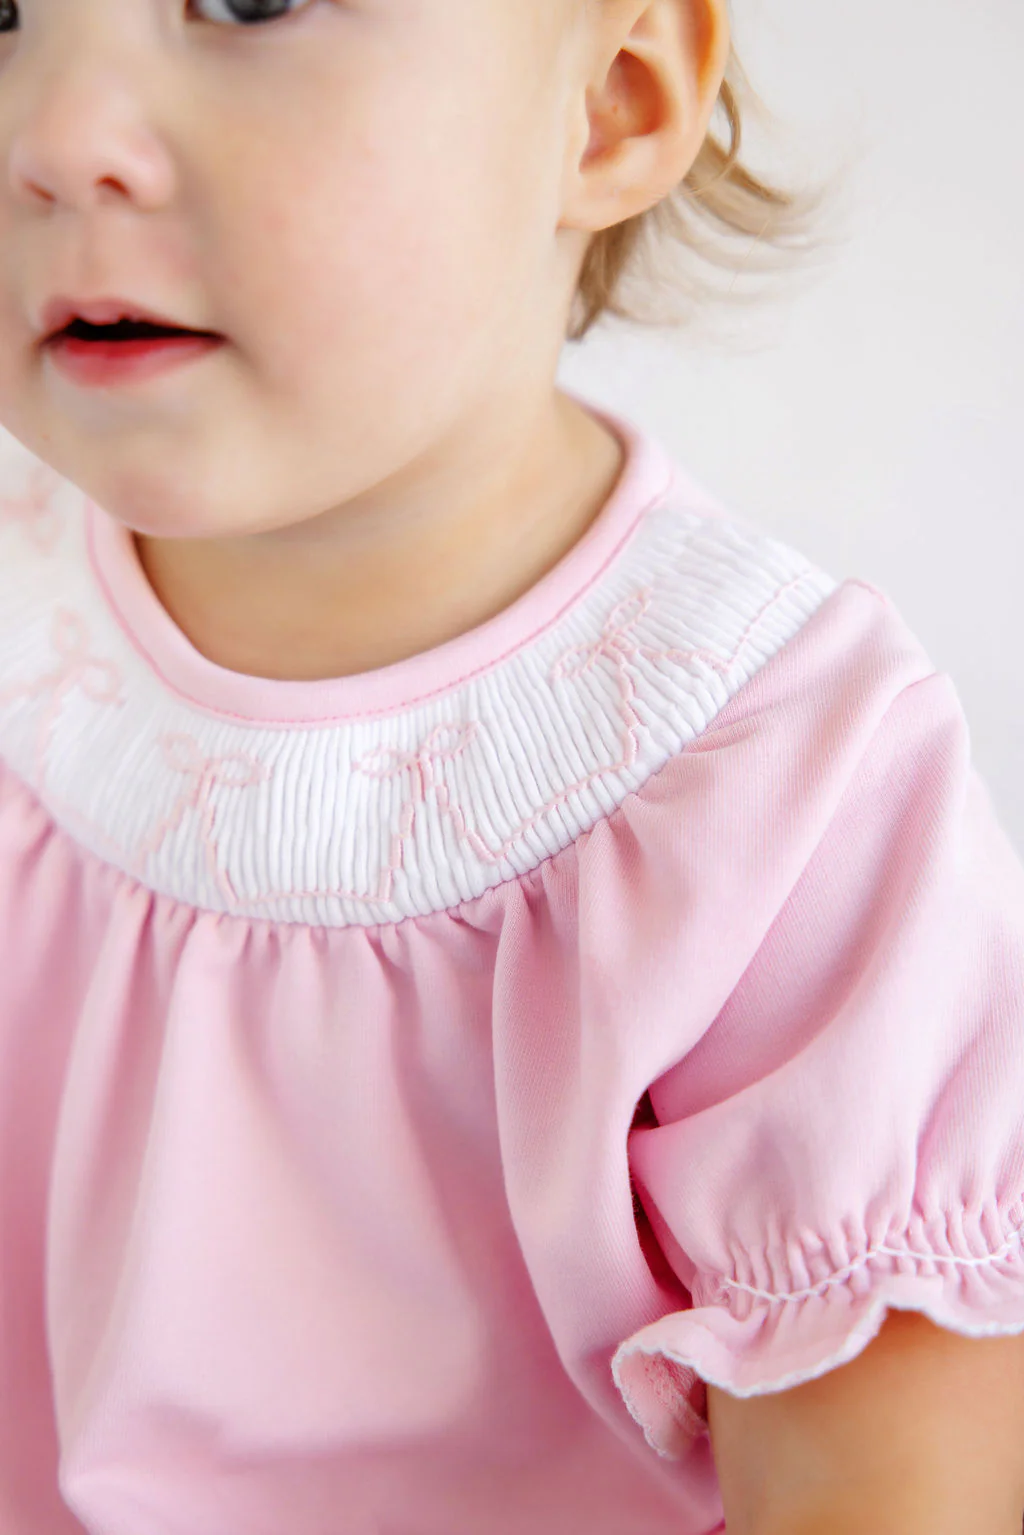 Short Sleeve Bridget Bubble - Palm Beach Pink With Worth Avenue White Smocking & Palm Beach Pink Bows